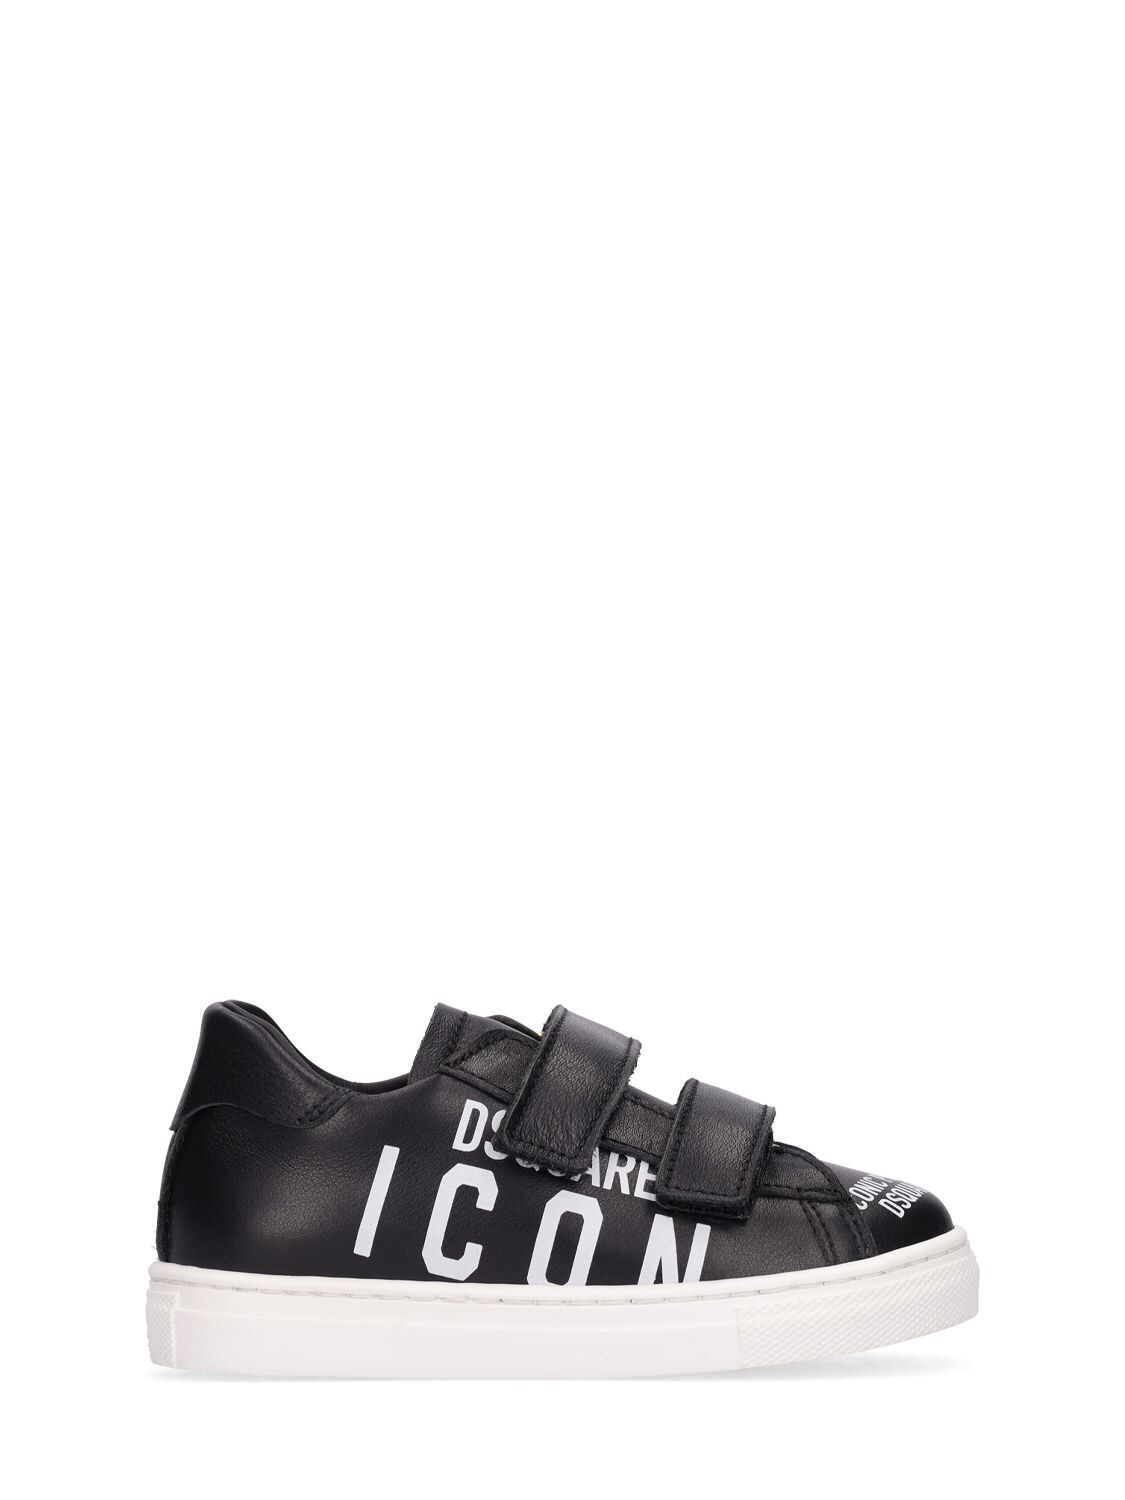 Icon Print Leather Strap Sneakers